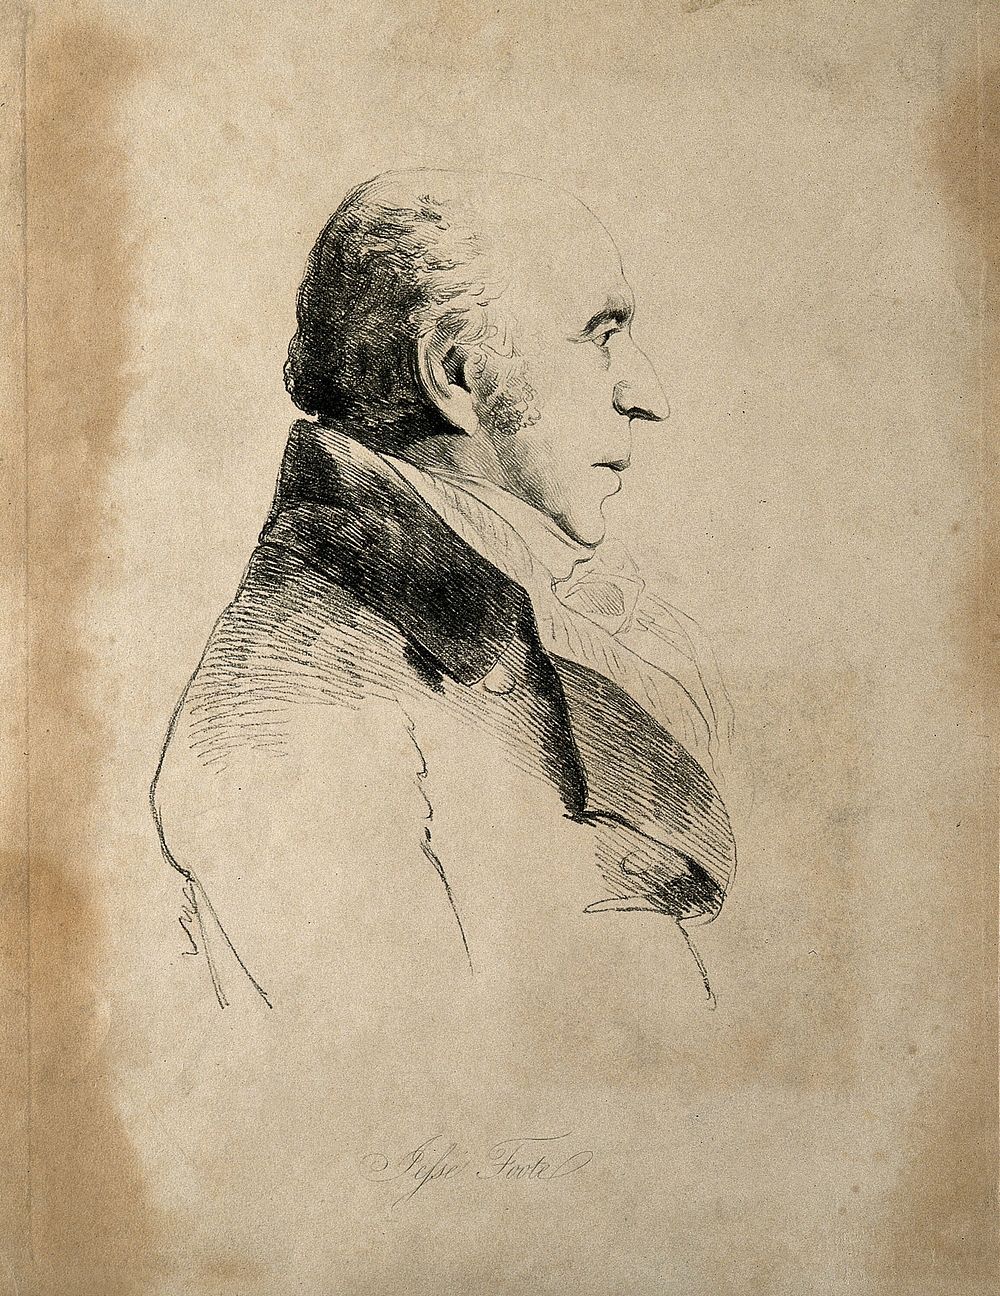 Jesse Foot. Soft-ground etching by W. Daniell after G. Dance.